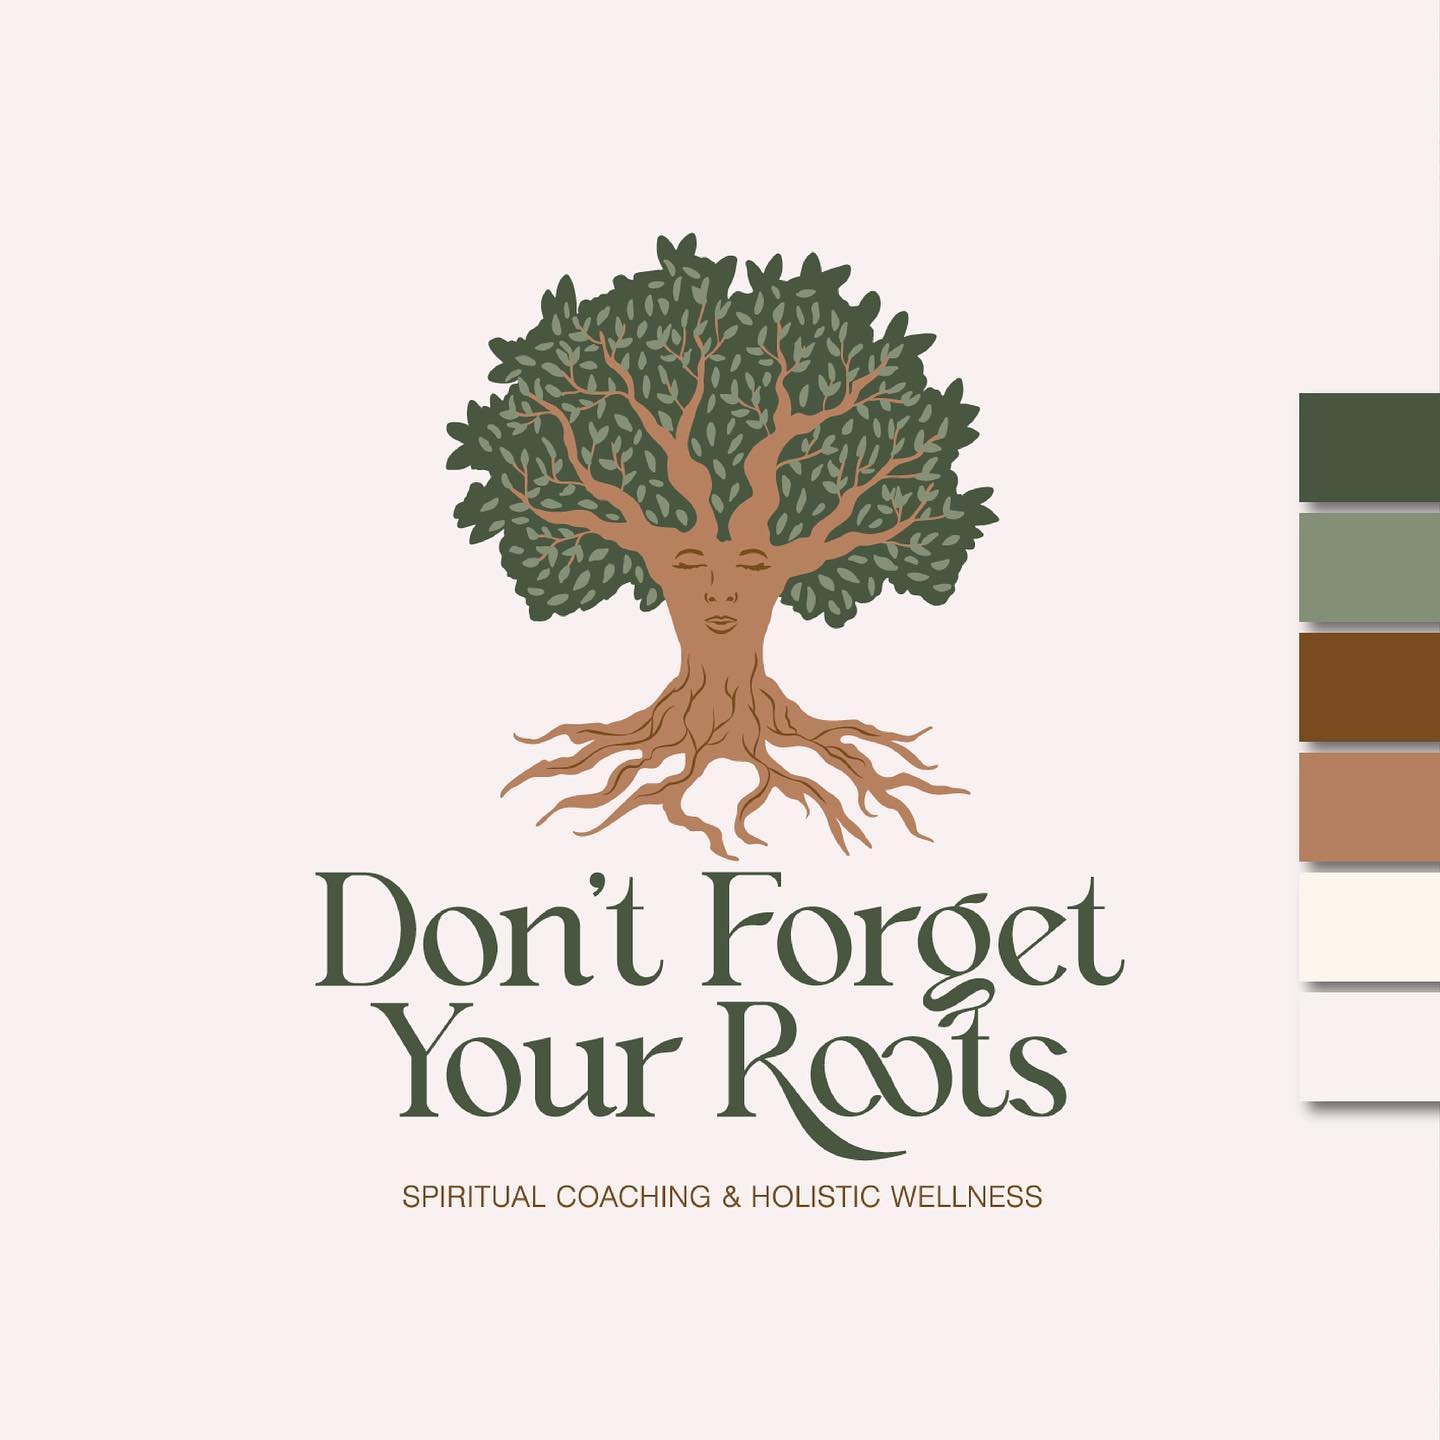 *drumrolls* Say hello to Don&rsquo;t Forget Your Roots! 🌳

A spiritual coaching &amp; holistic wellness company

#branding #branddesigner #graphicdesigner #graphicdesign #branddesign #visualidentity #logodesign #logodesigner #visualidentitydesign #b